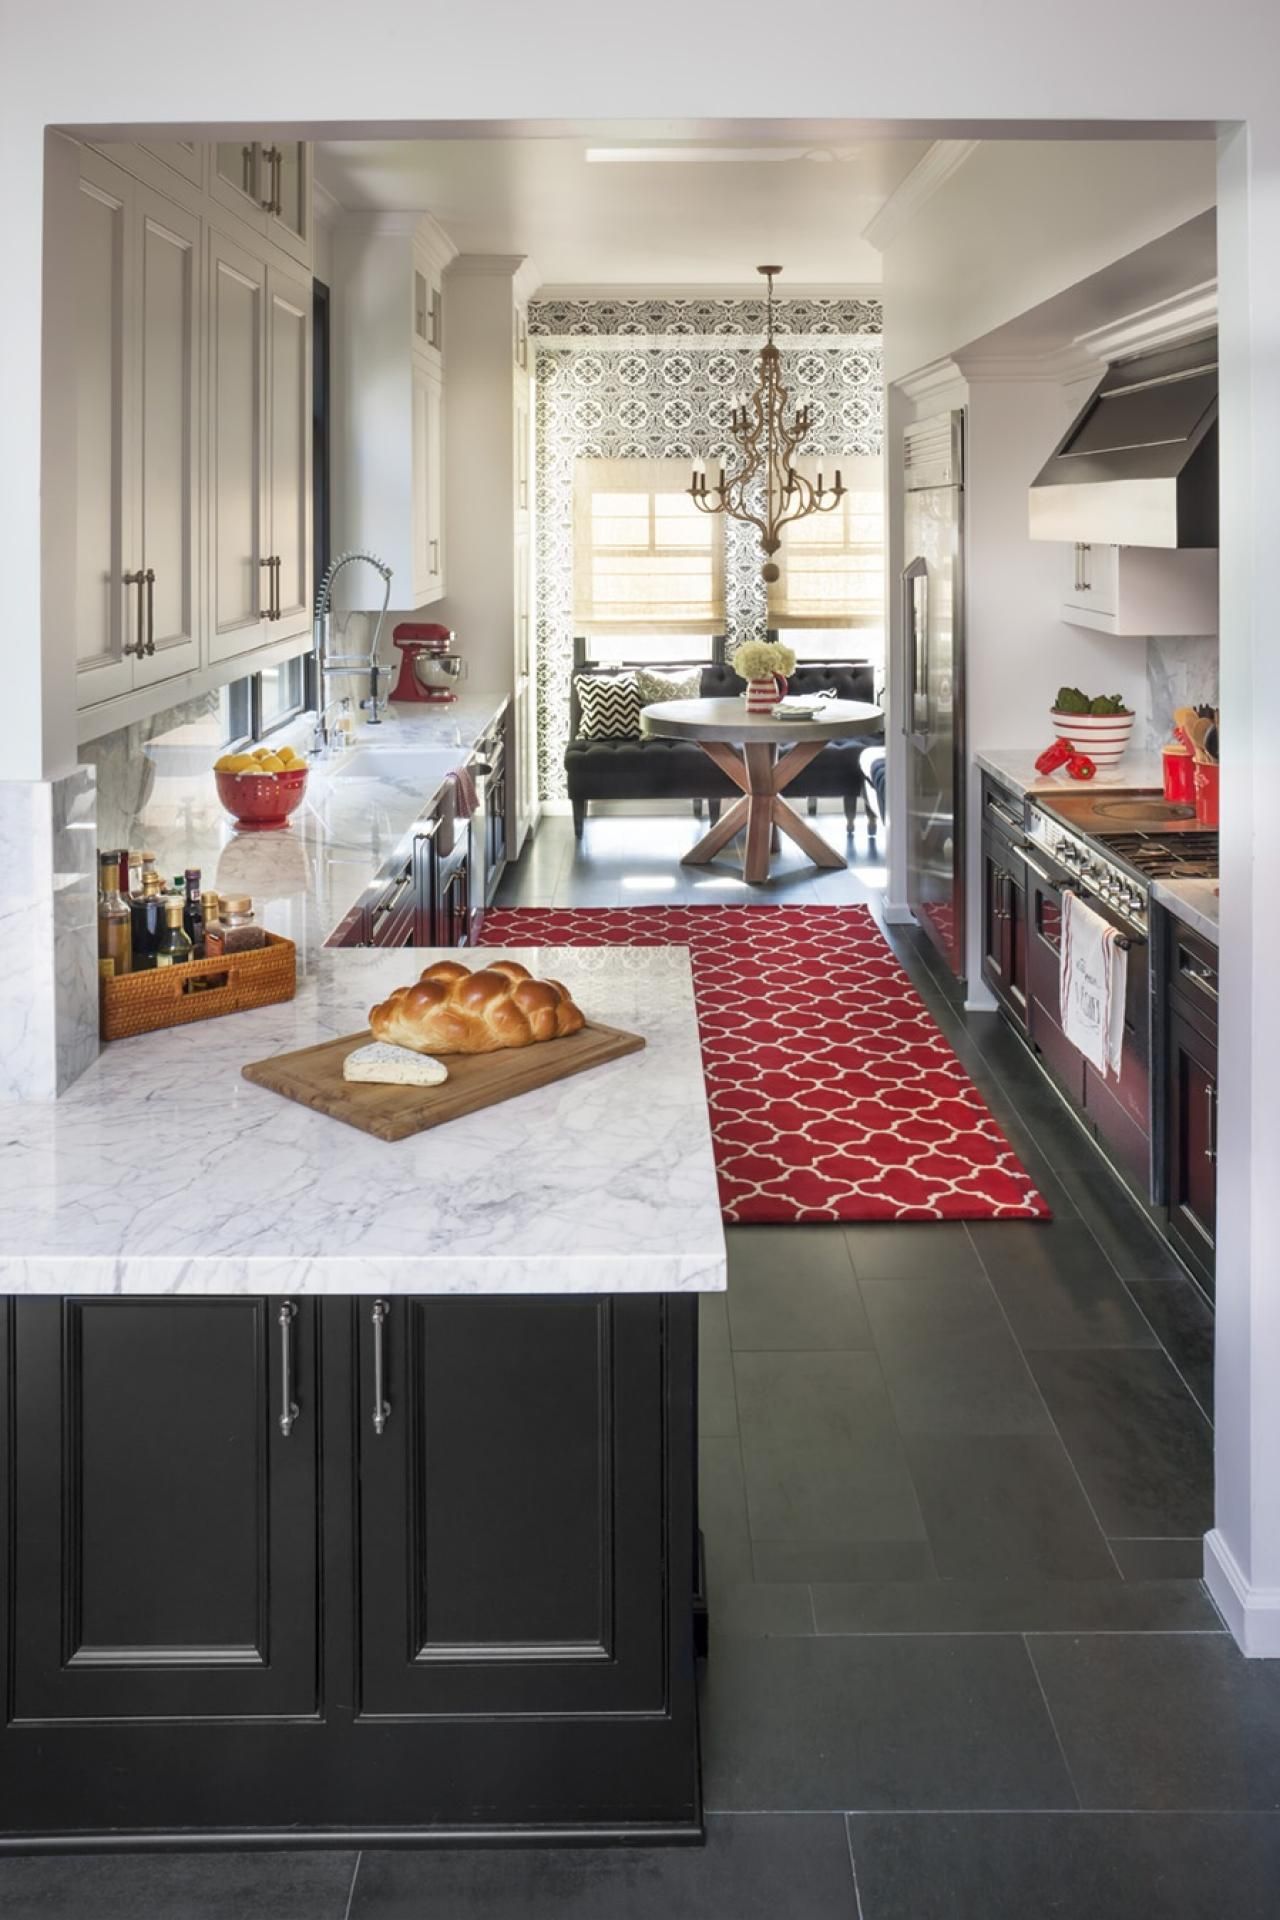 Maximizing Space and Functionality: Galley Kitchen Ideas With a Stylish Breakfast Bar